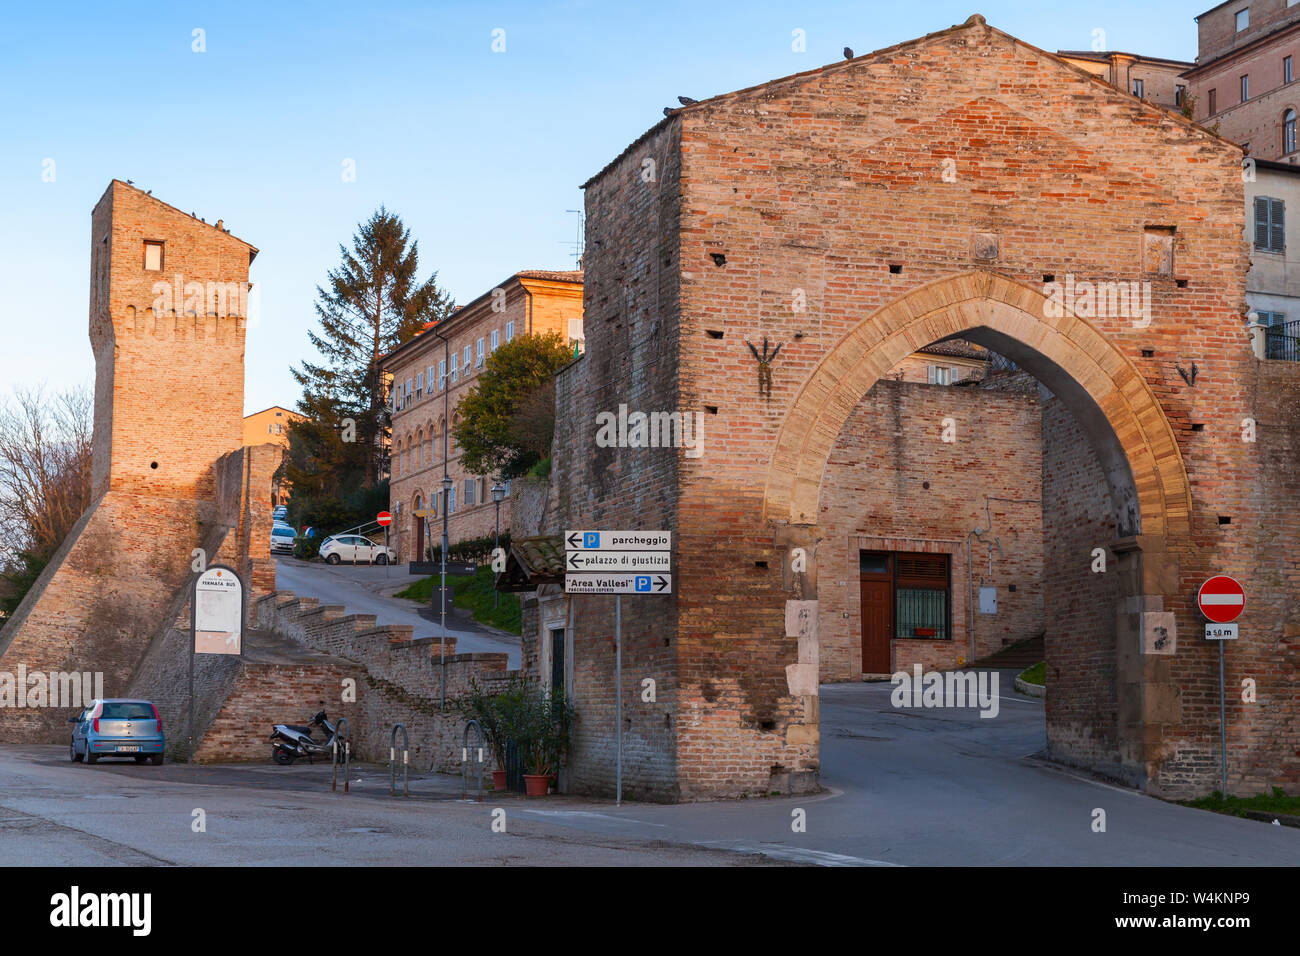 Fermo, Italy - February 8, 2016: Street view of Fermo with stone gate and old town fortifications Stock Photo